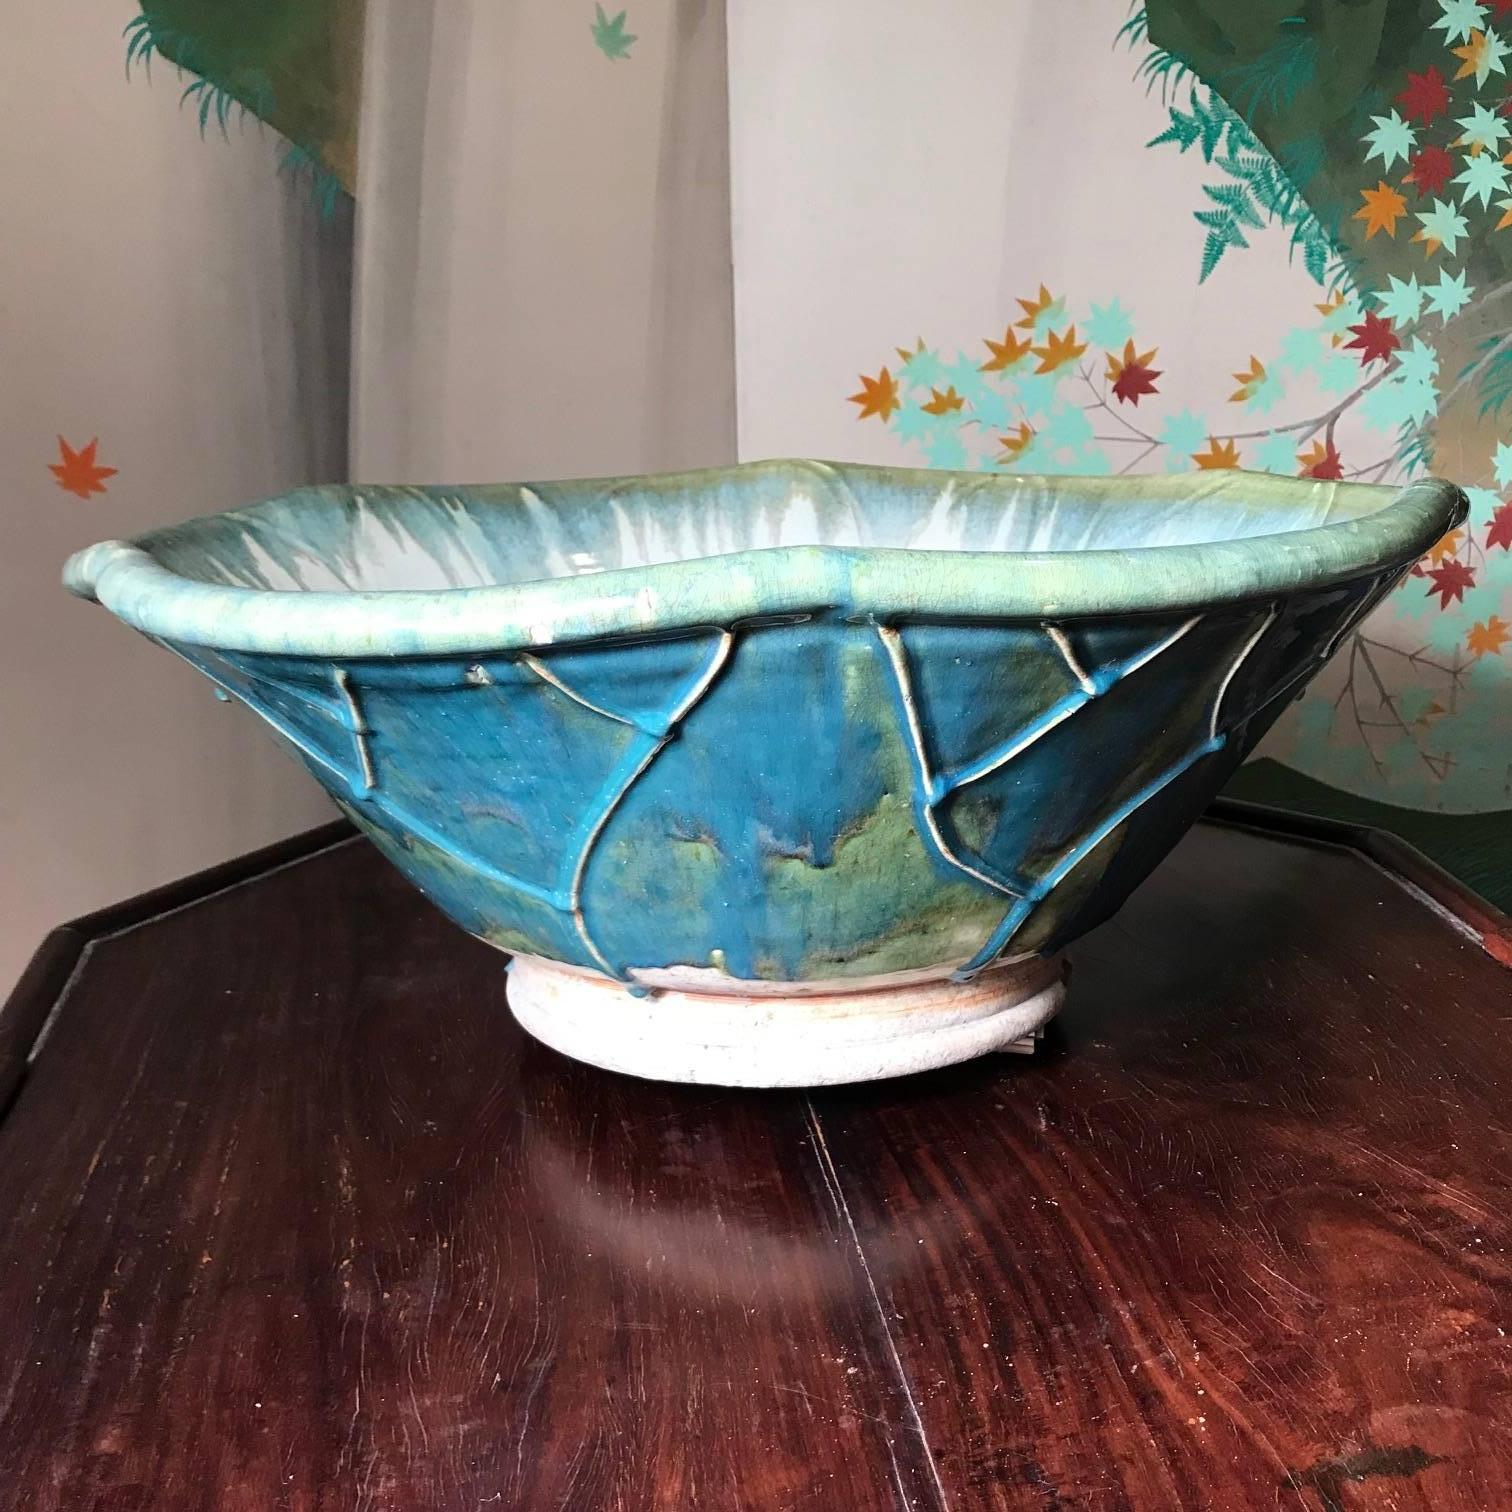 Japan, a big handsome, handmade, and hand glazed one-of-a-kind heavy thick stone ware vessel crafted in a lotus vein organic style and from unique Japanese clay called choseki (long life clay). This glazed planter or water vessel (mizubachi) comes